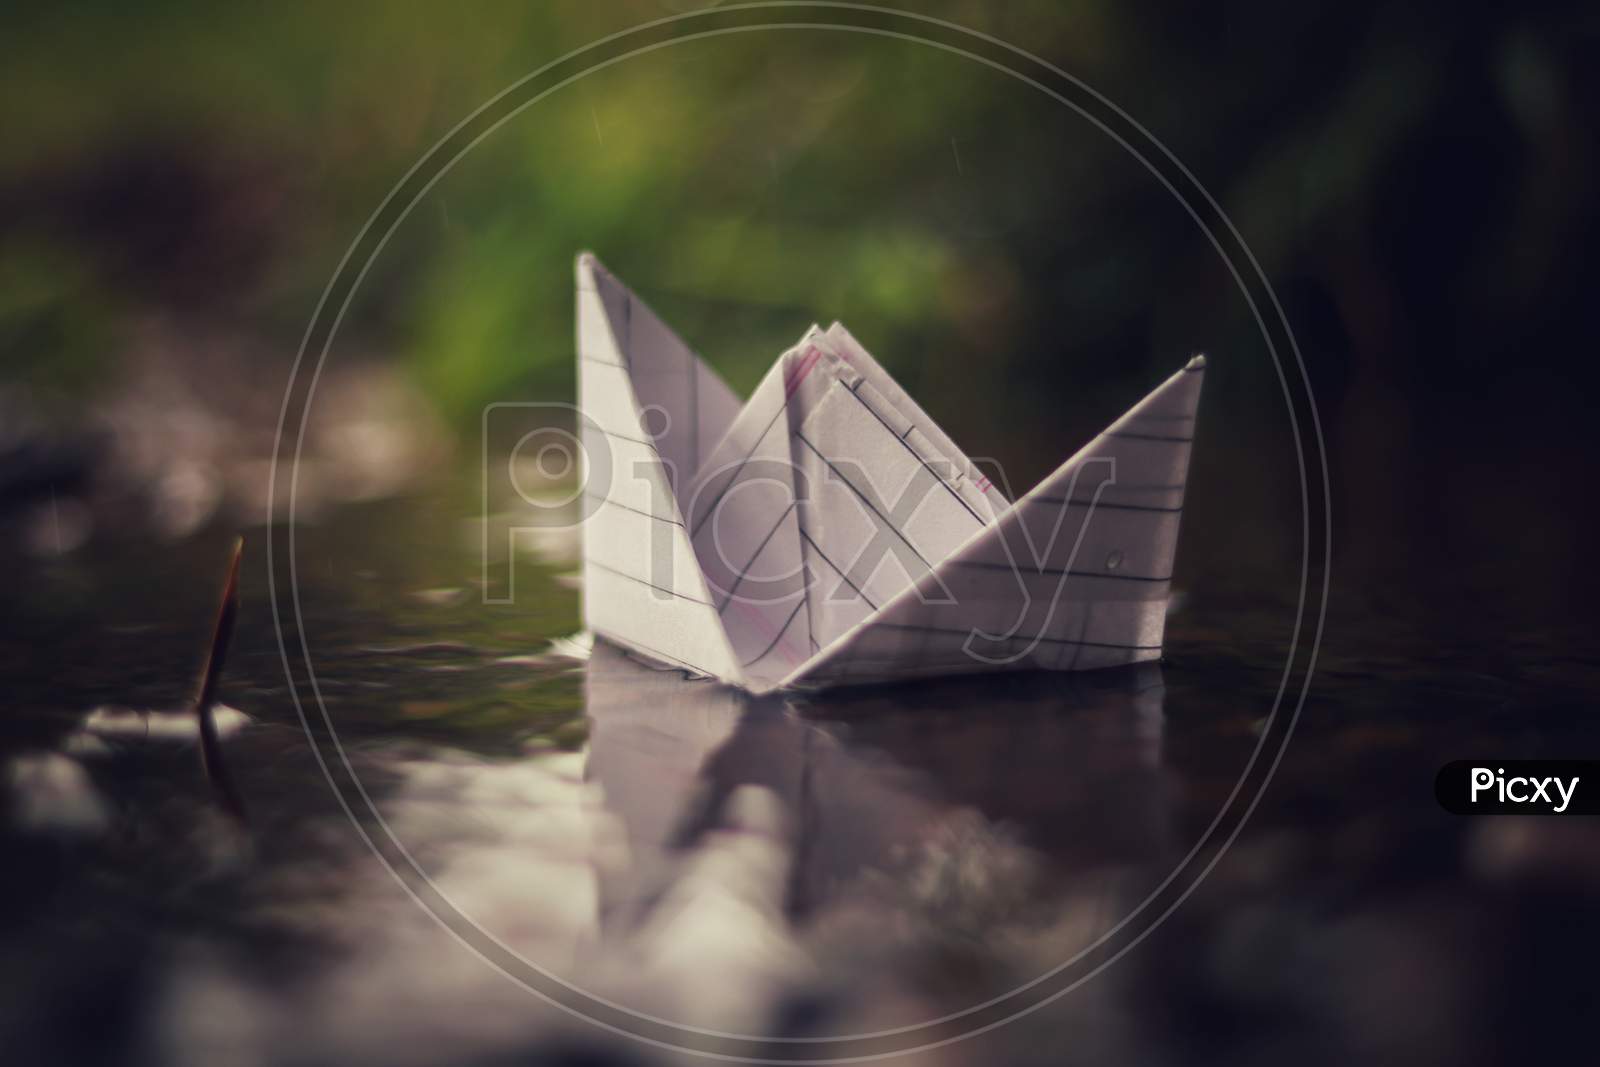 A paper boat floating on rainy water in rainy season